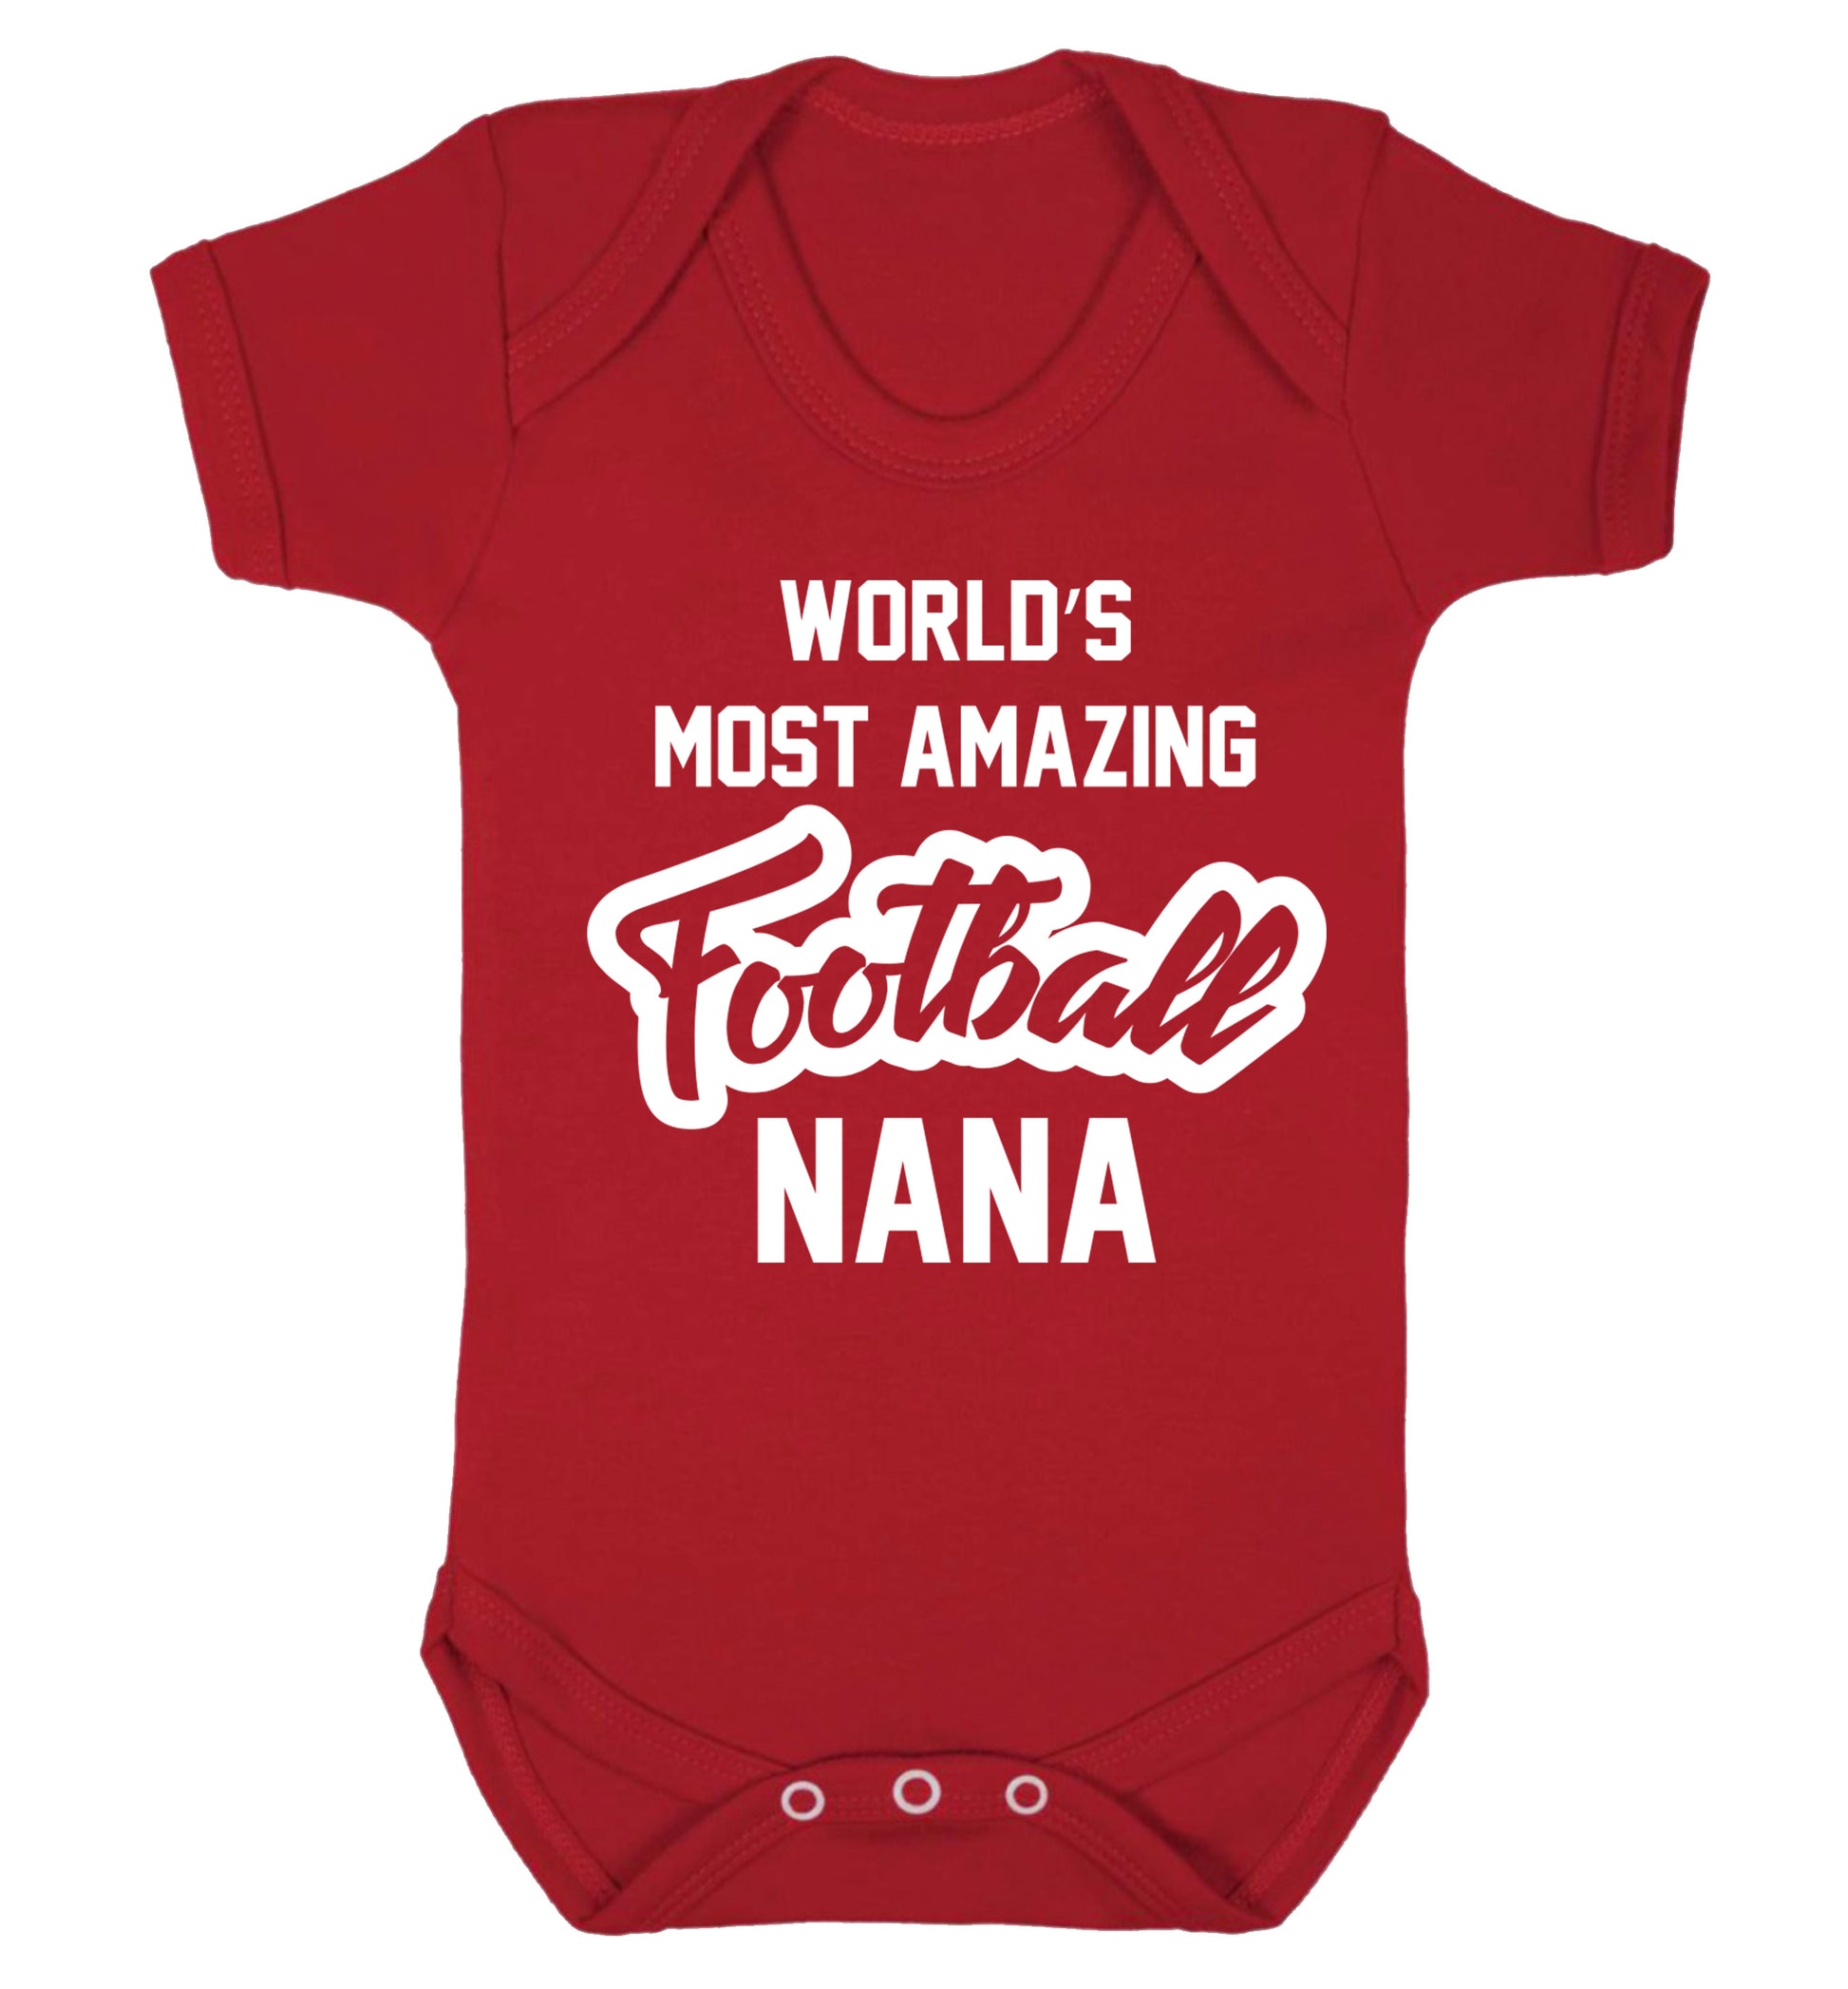 Worlds most amazing football nana Baby Vest red 18-24 months